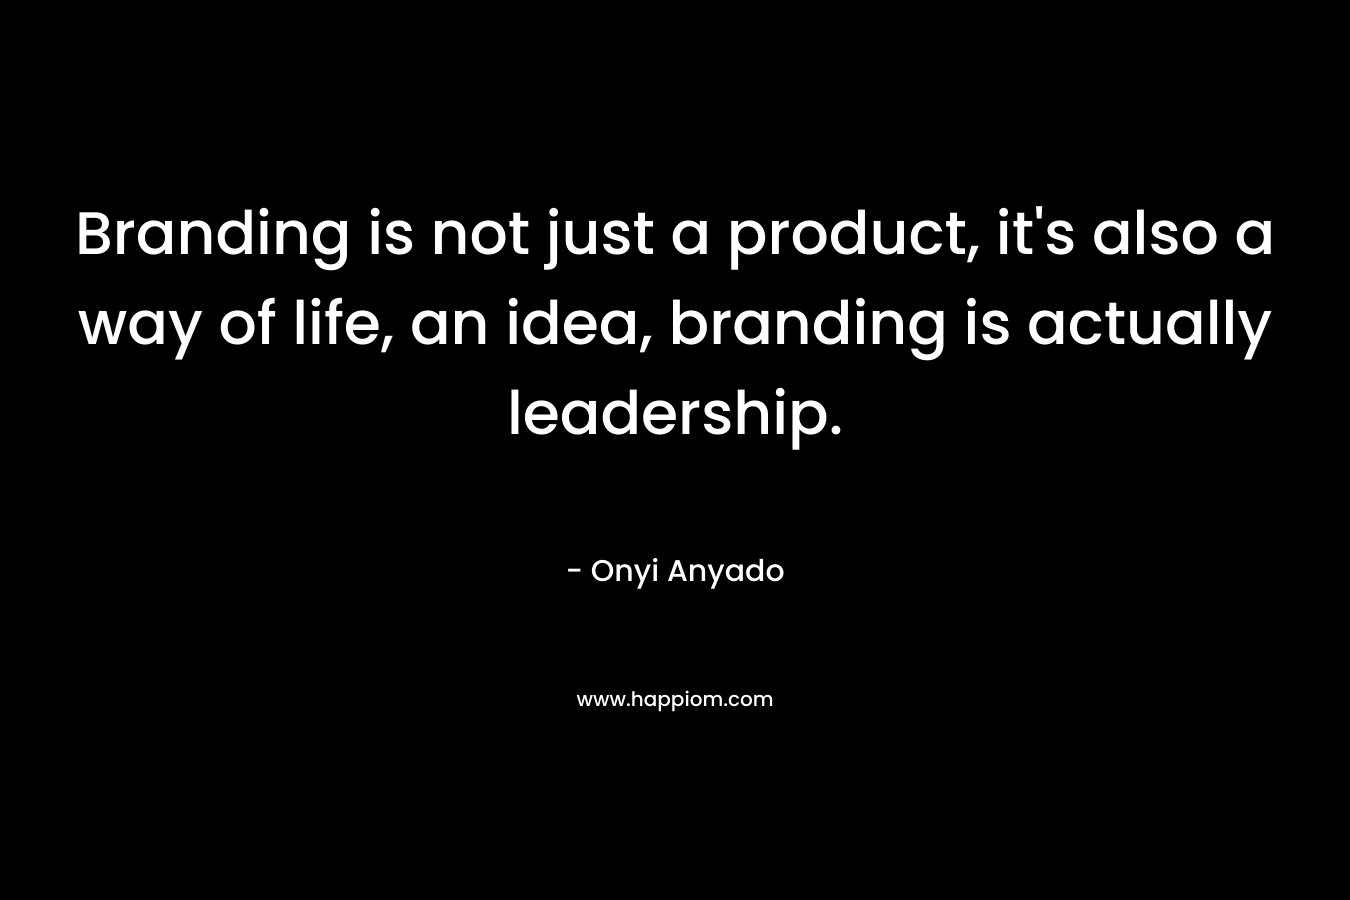 Branding is not just a product, it's also a way of life, an idea, branding is actually leadership.